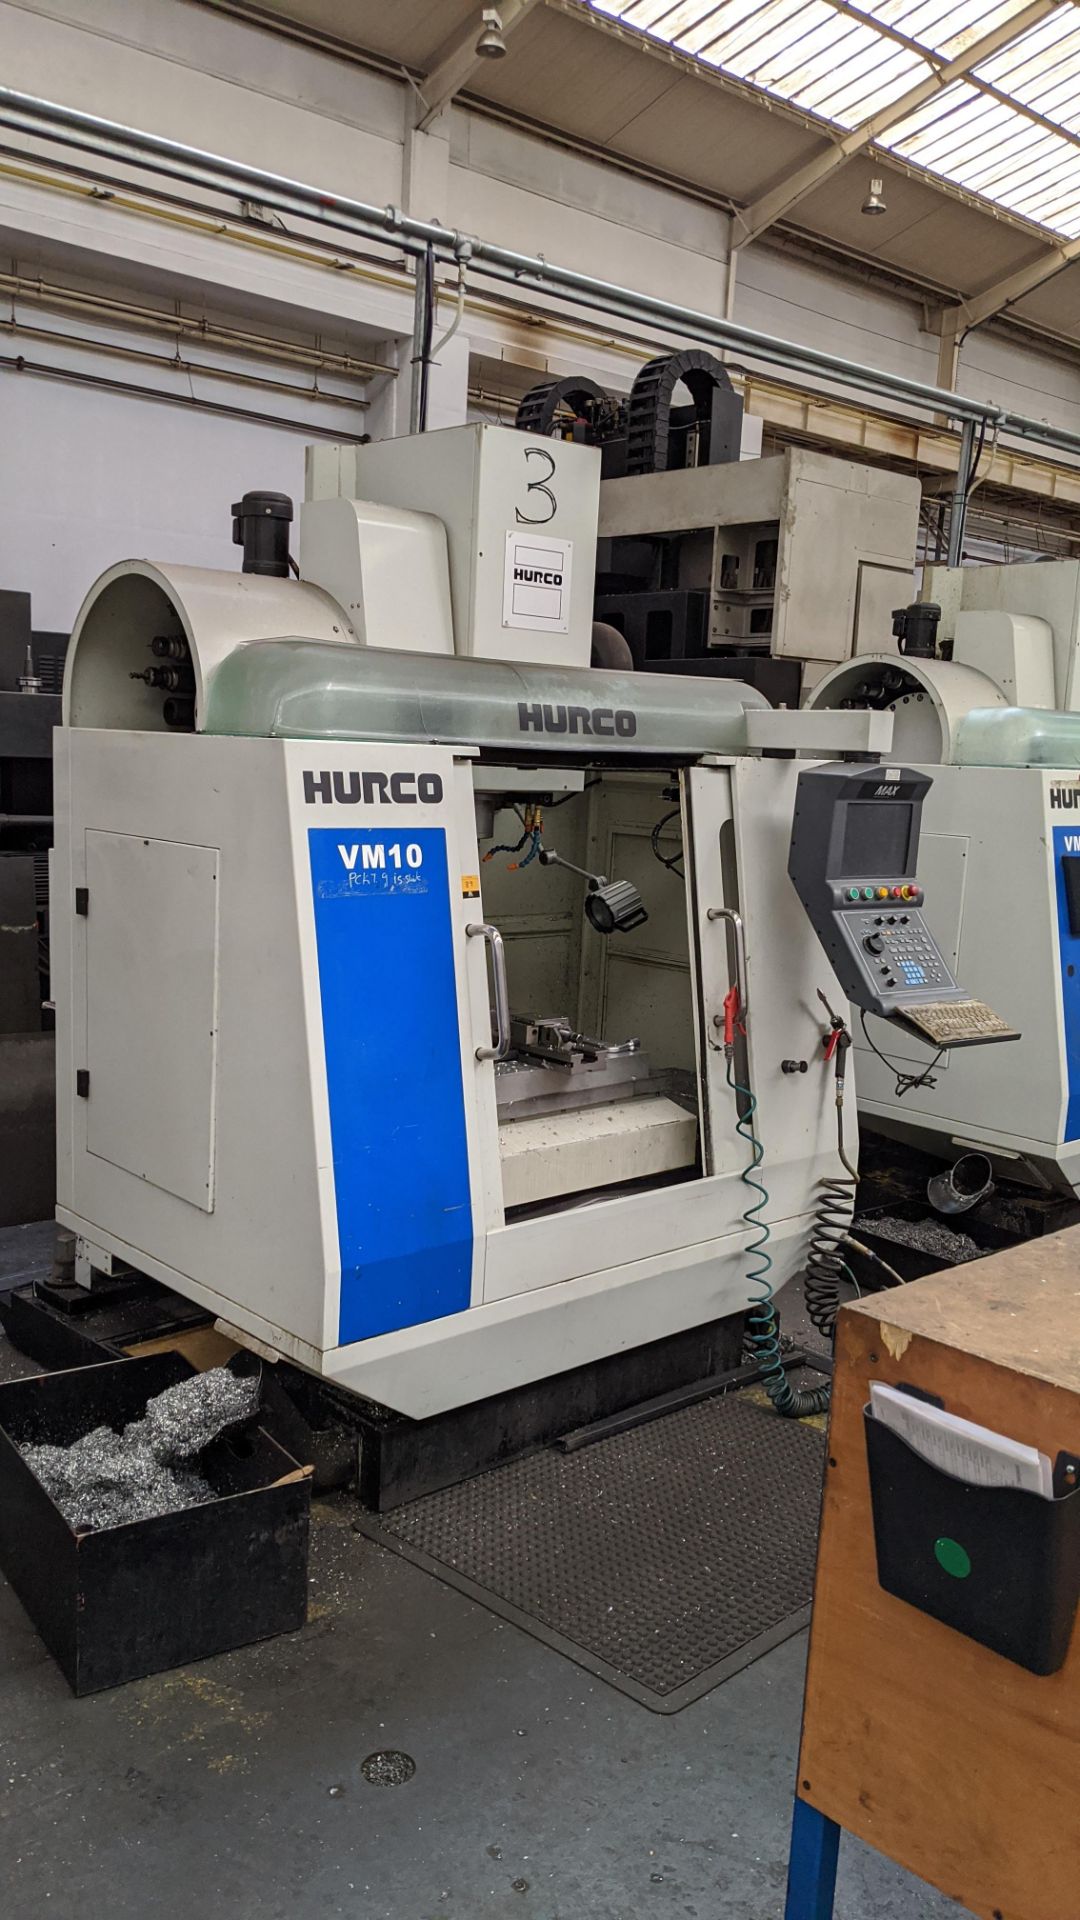 2011 Hurco VM10 CNC machining centre, serial no. H-V1E0580. Incorporates Max swing-out controller. - Image 2 of 20